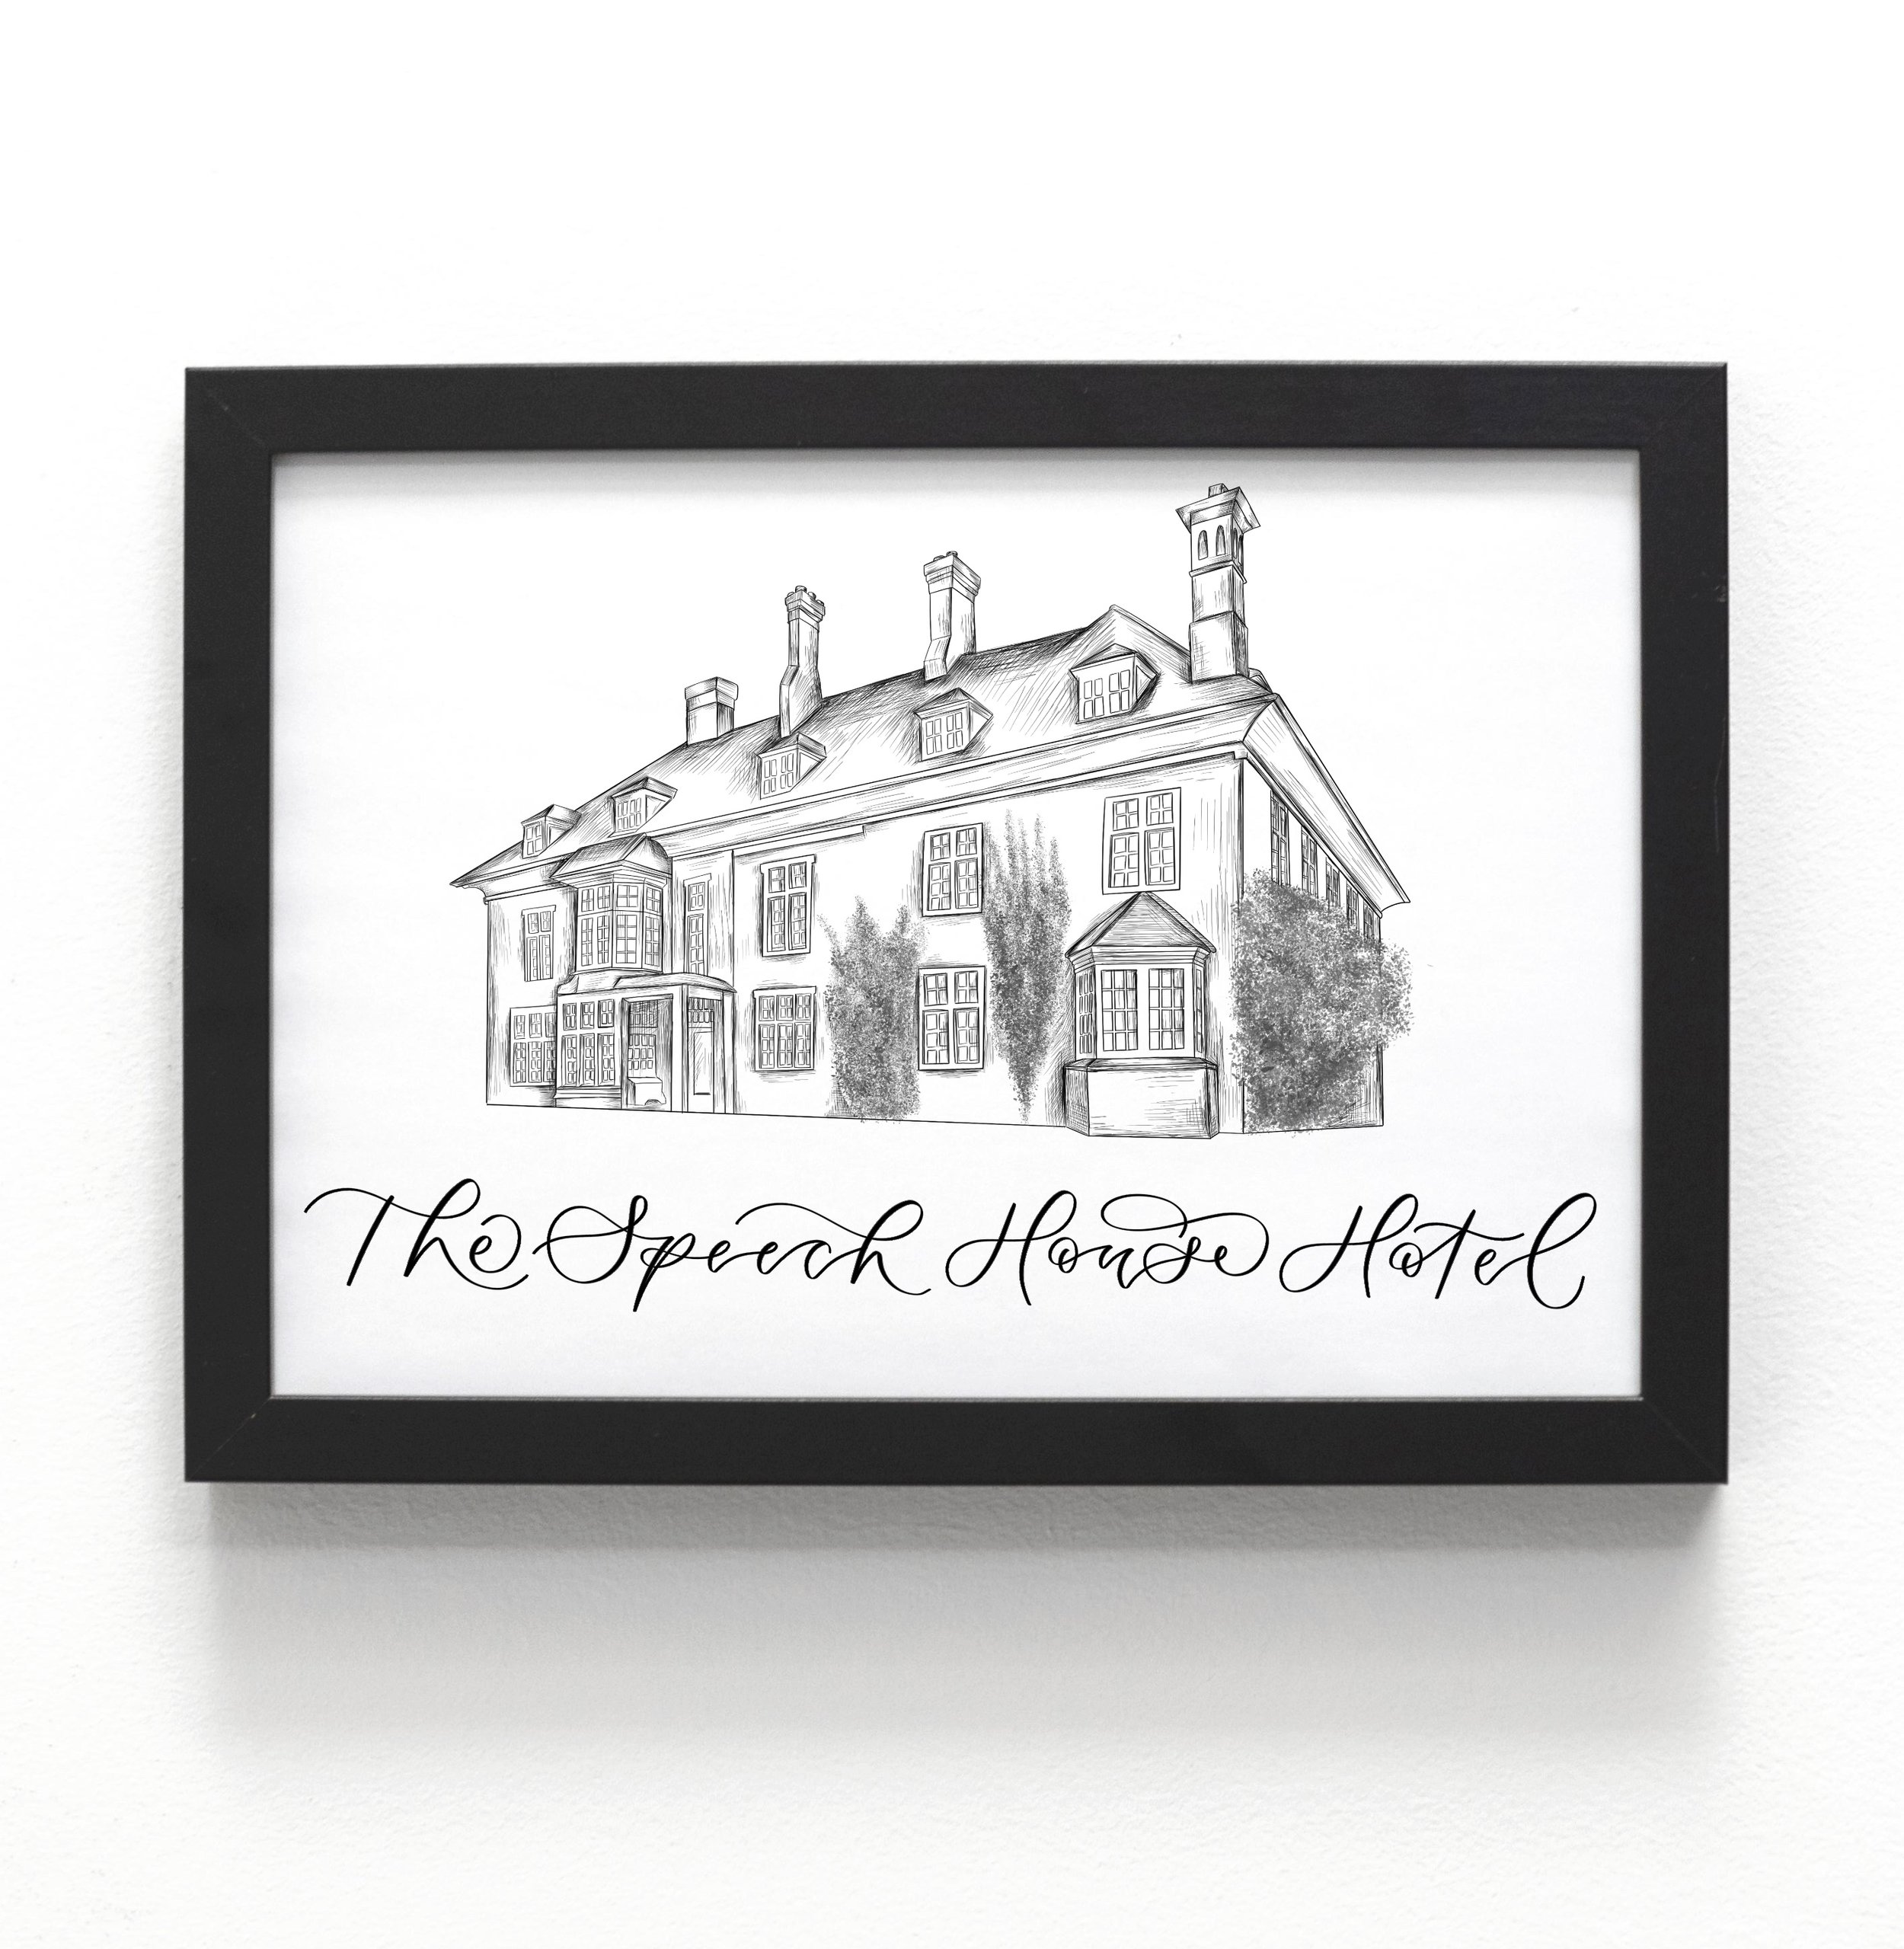 The Speech House Hotel drawing - venue illustration of the speech house hotel by The Amyverse.jpeg